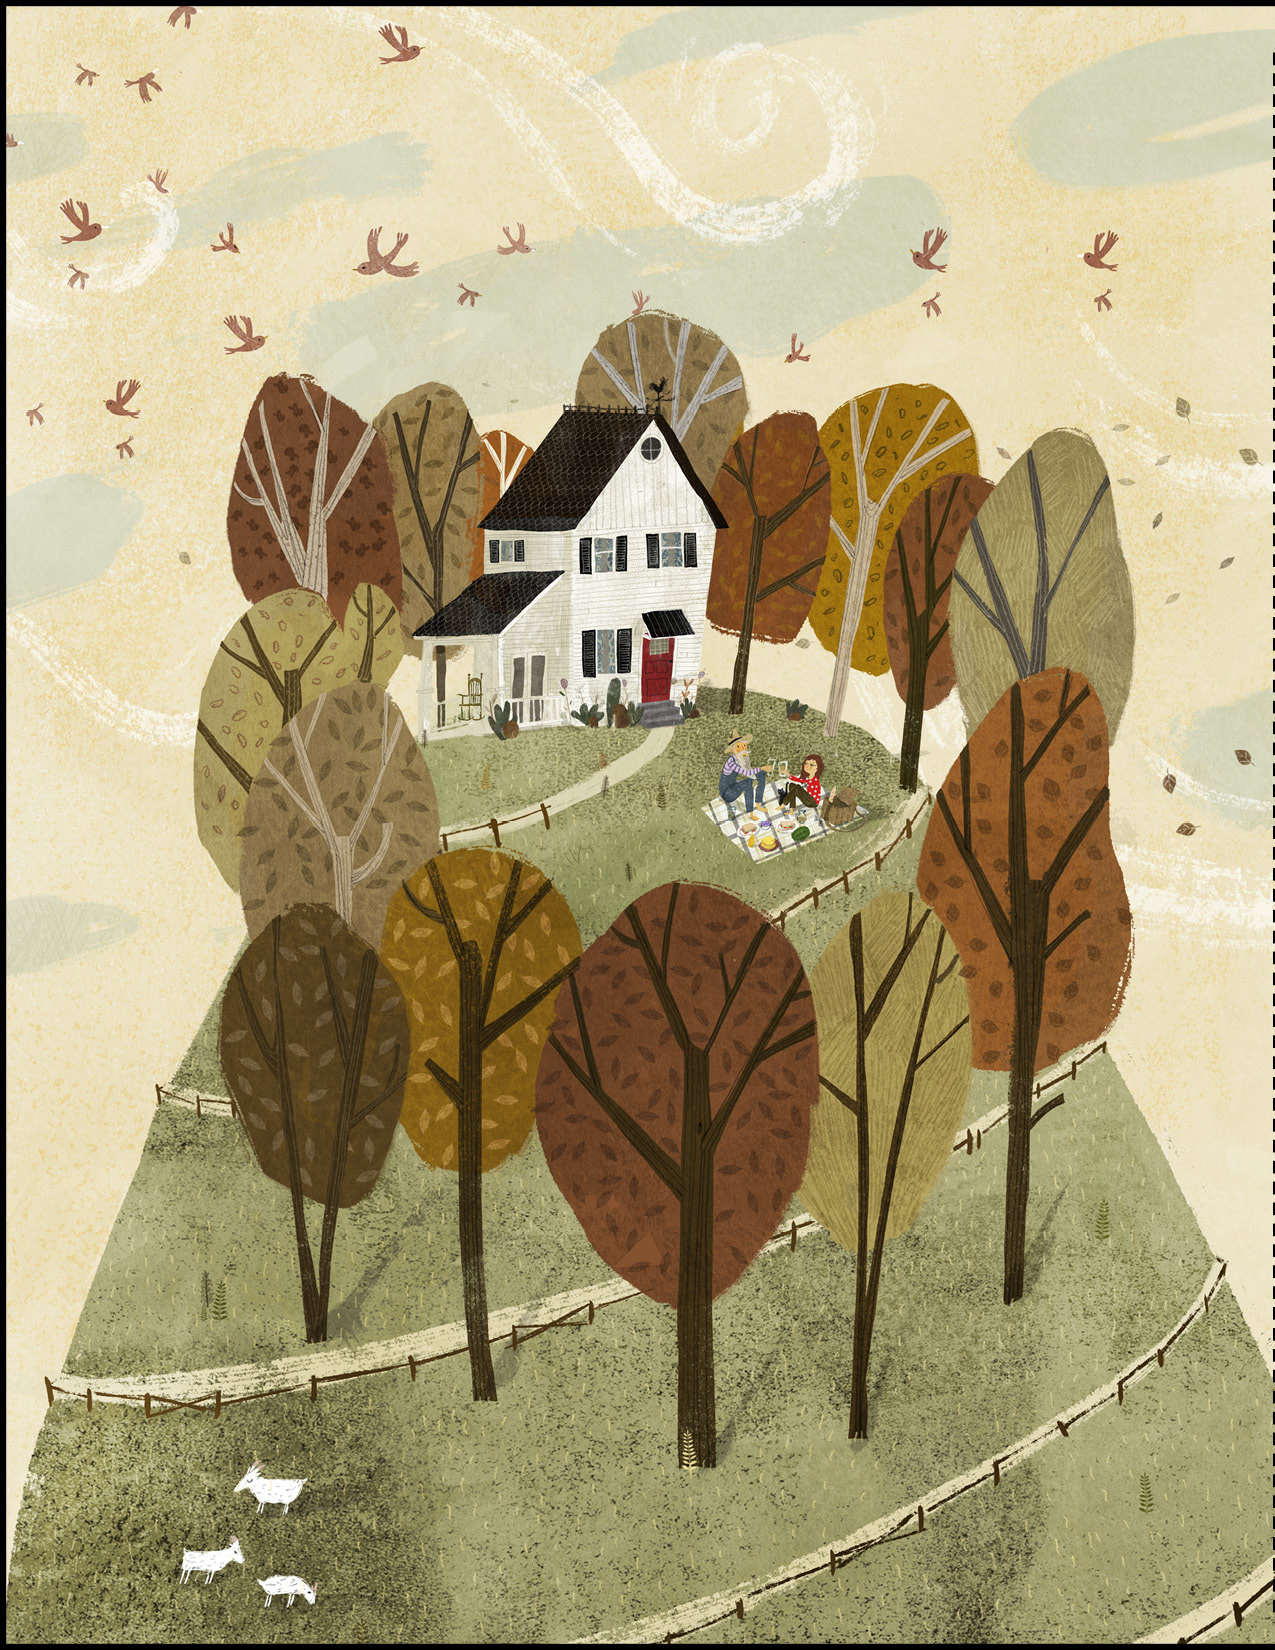 Illustration from the book that features protagonist Kate and an elderly man enjoying a picnic at the top of a hill next to a house surrounded by trees. The sky is windy and filled with birds.